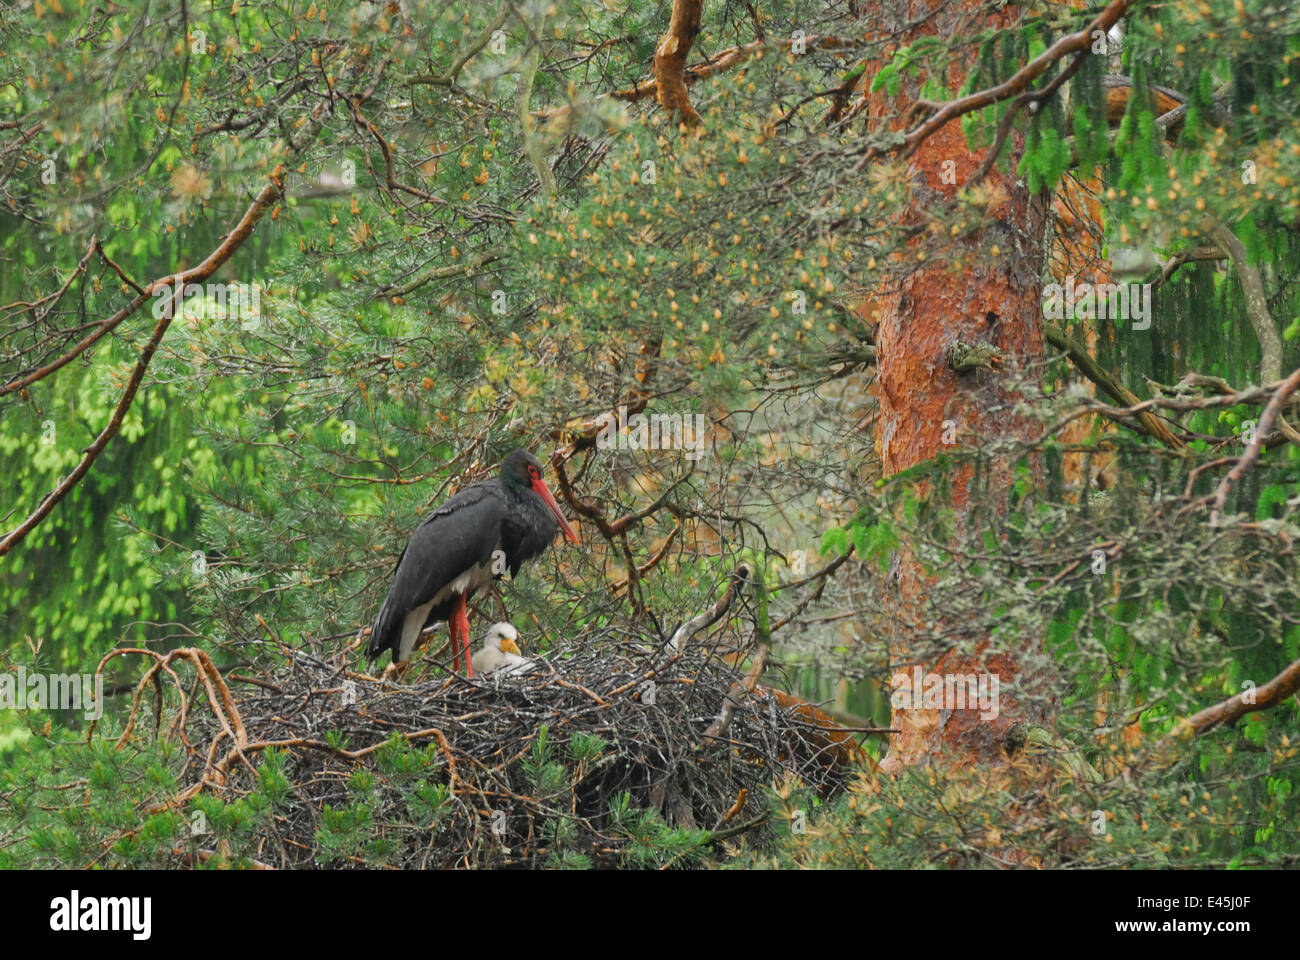 Black stork (Ciconia nigra) on nest with chick, Latvia, June 2009 NOT AVAILABLE FOR GREETING CARDS OR CALENDARS. WWE OUTDOOR EXHIBITION Stock Photo